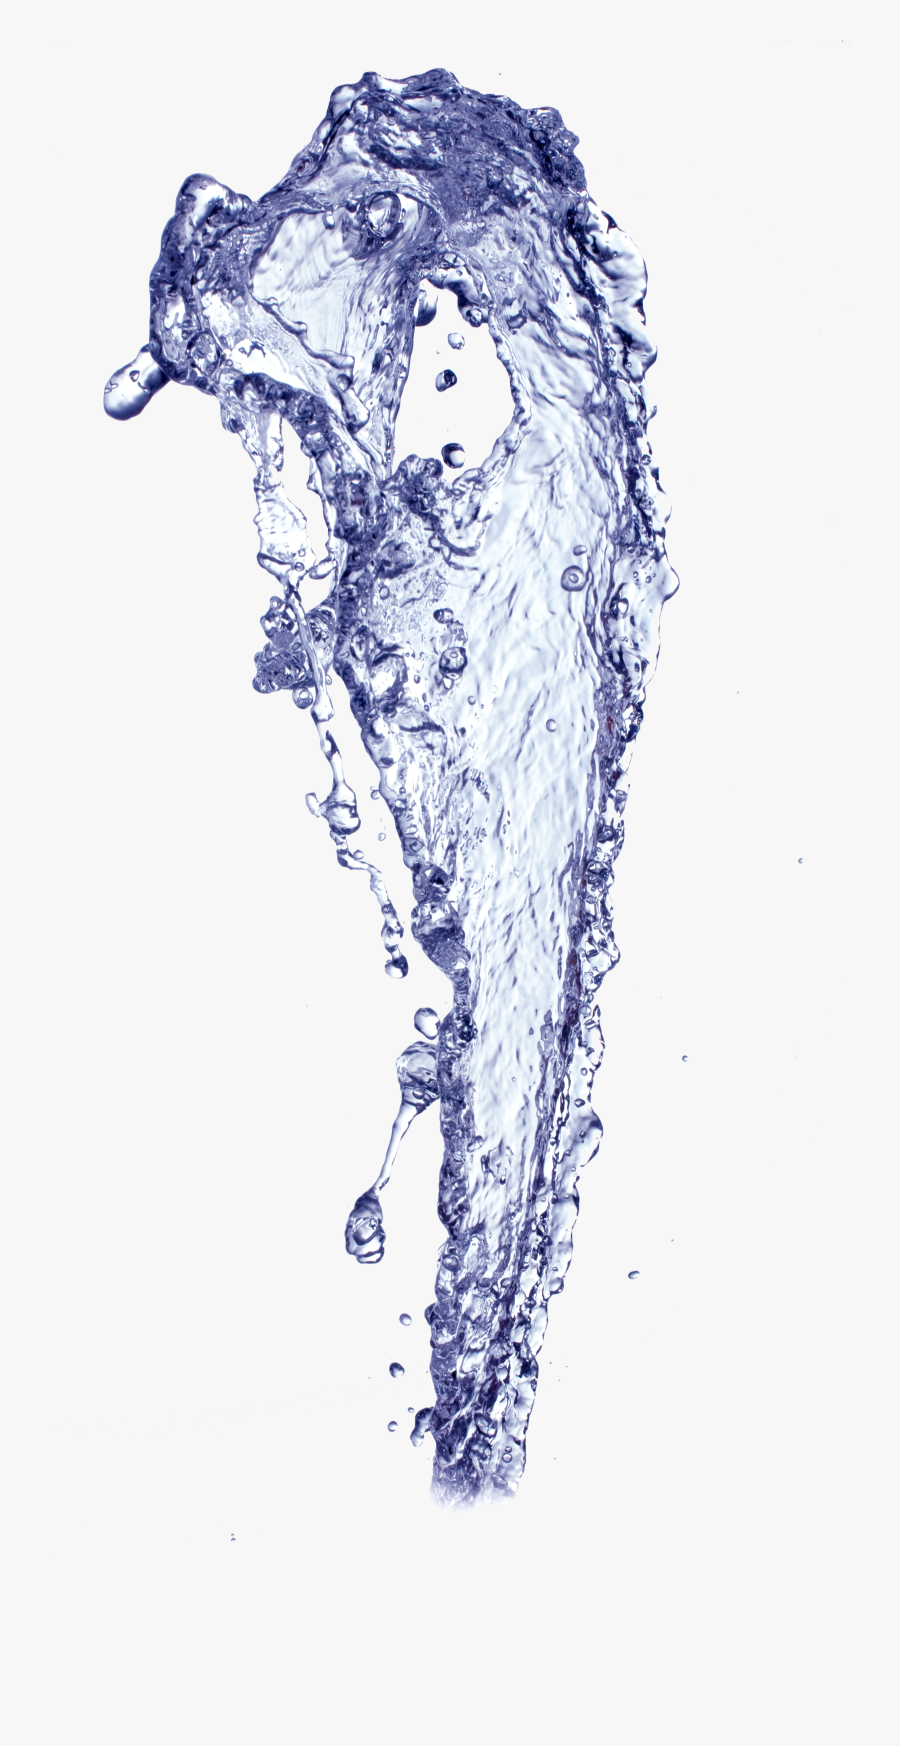 Water Png Images And Background - Water Splash Up Png, Transparent Clipart